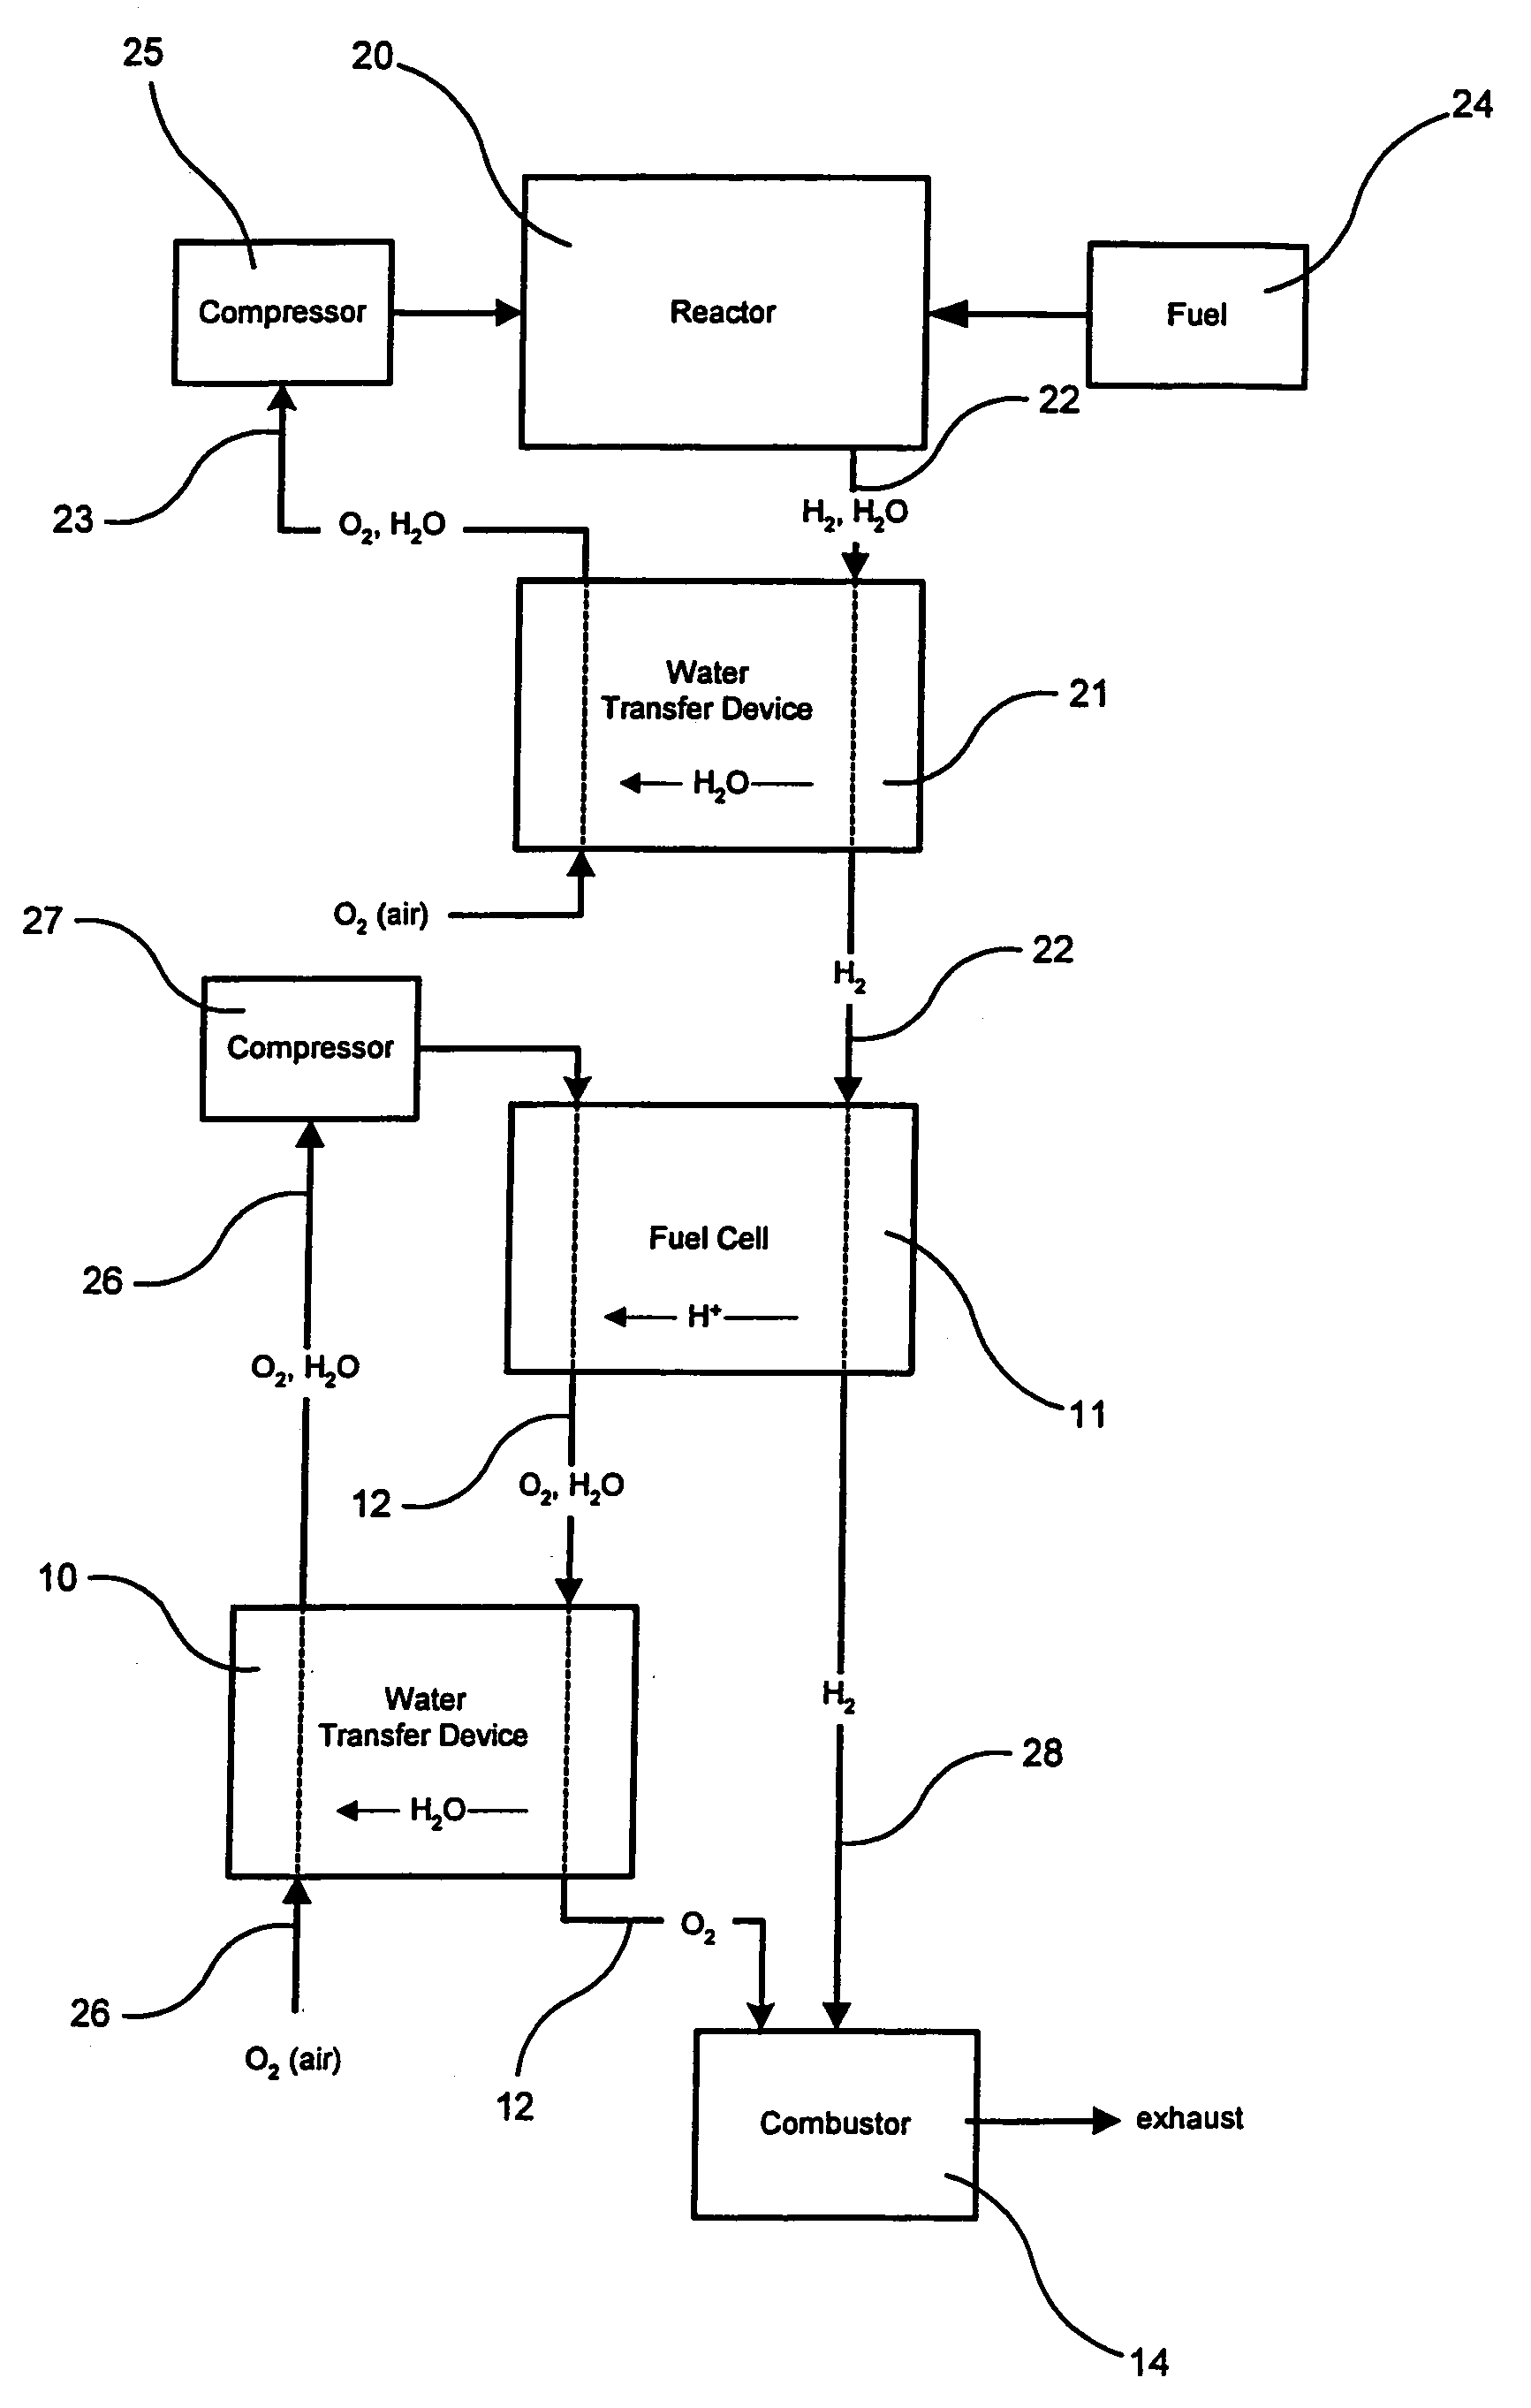 Method of operating a fuel cell power plant